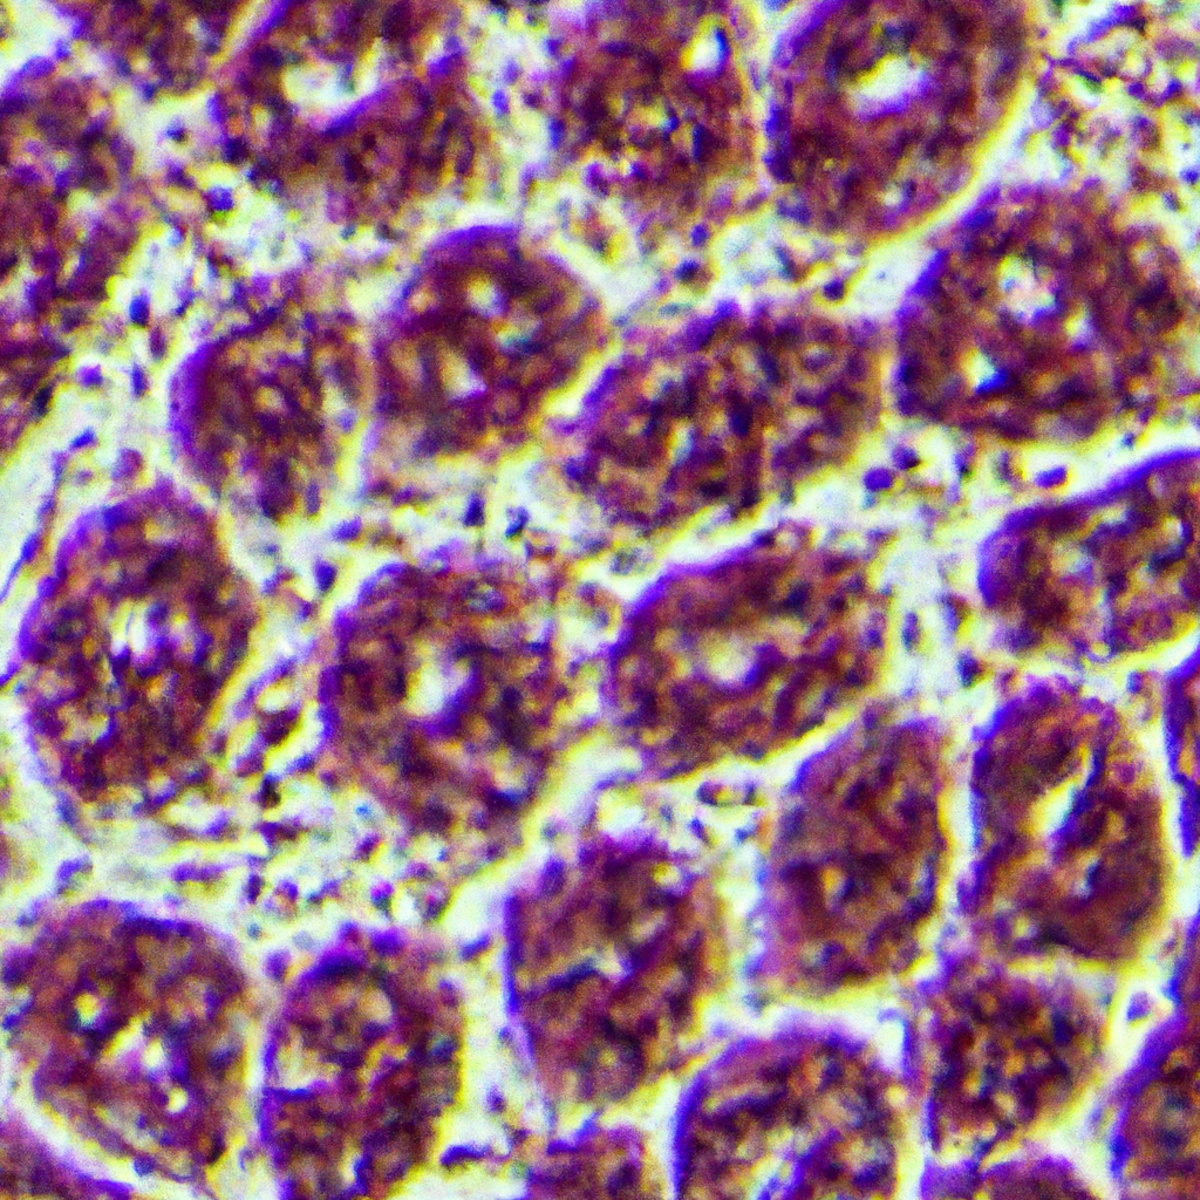 Close-up image of Langerhans cells stained with dyes, showcasing distinct morphology and abundant cytoplasmic granules - Langerhans Cell Histiocytosis (LCH)